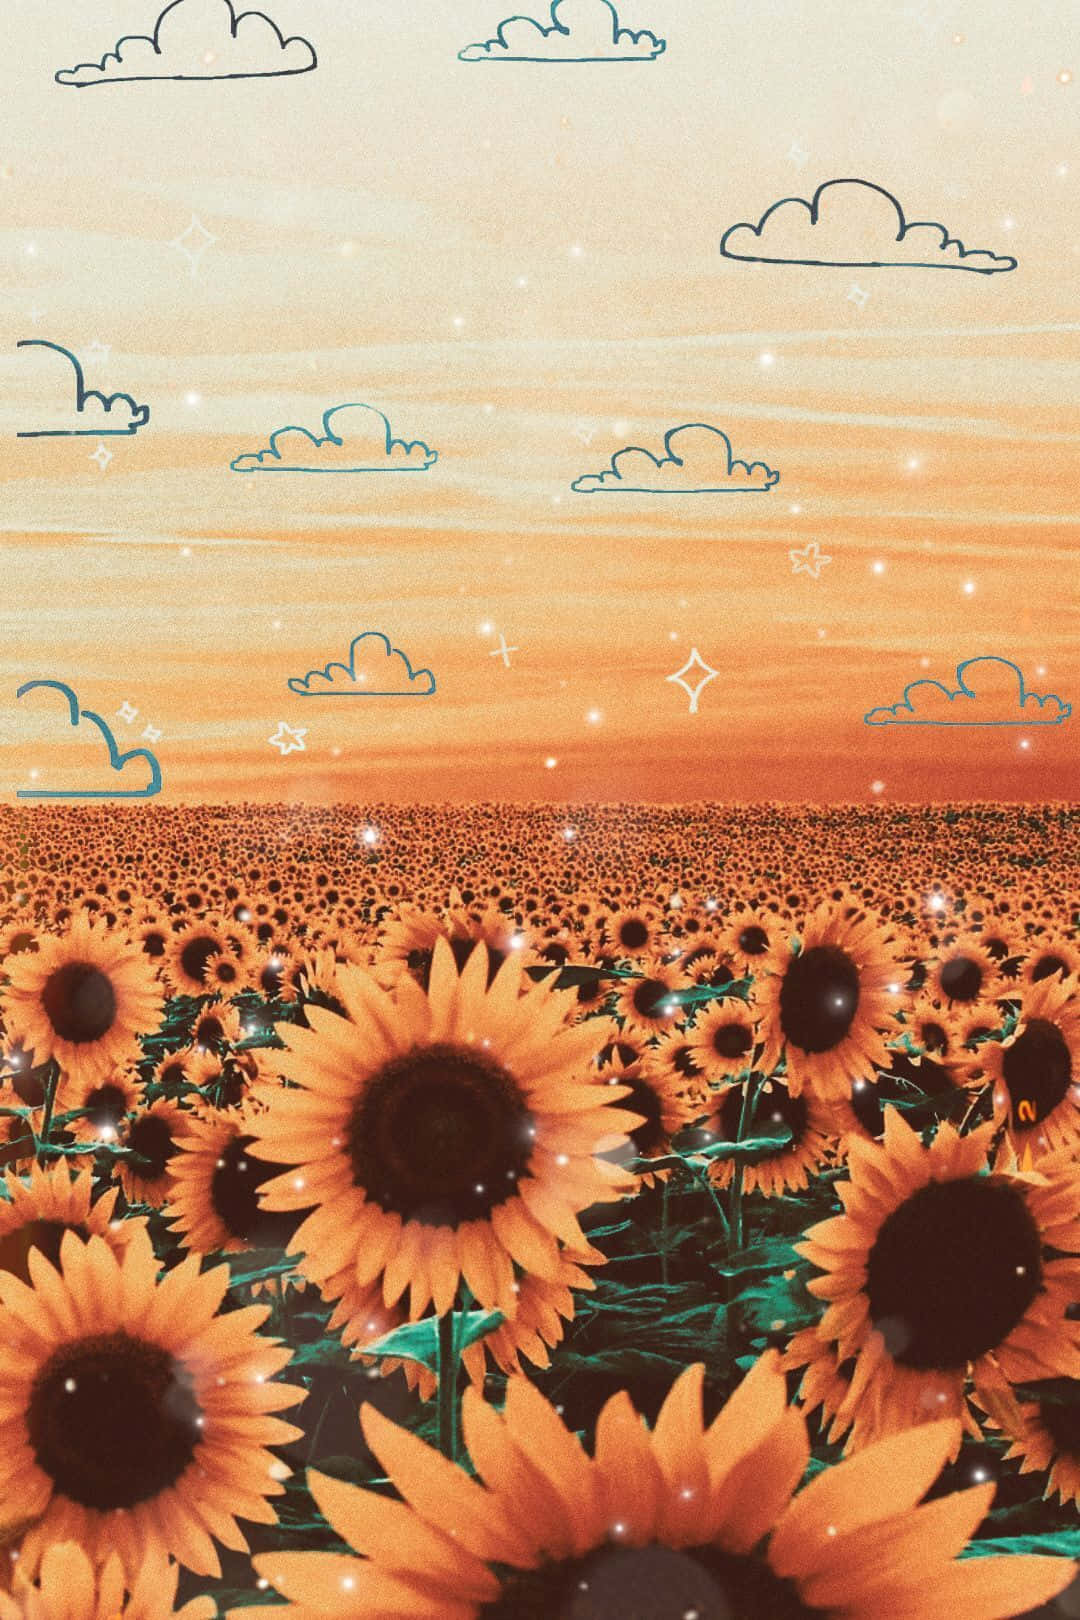 Sunflowers In The Sky With Clouds Background